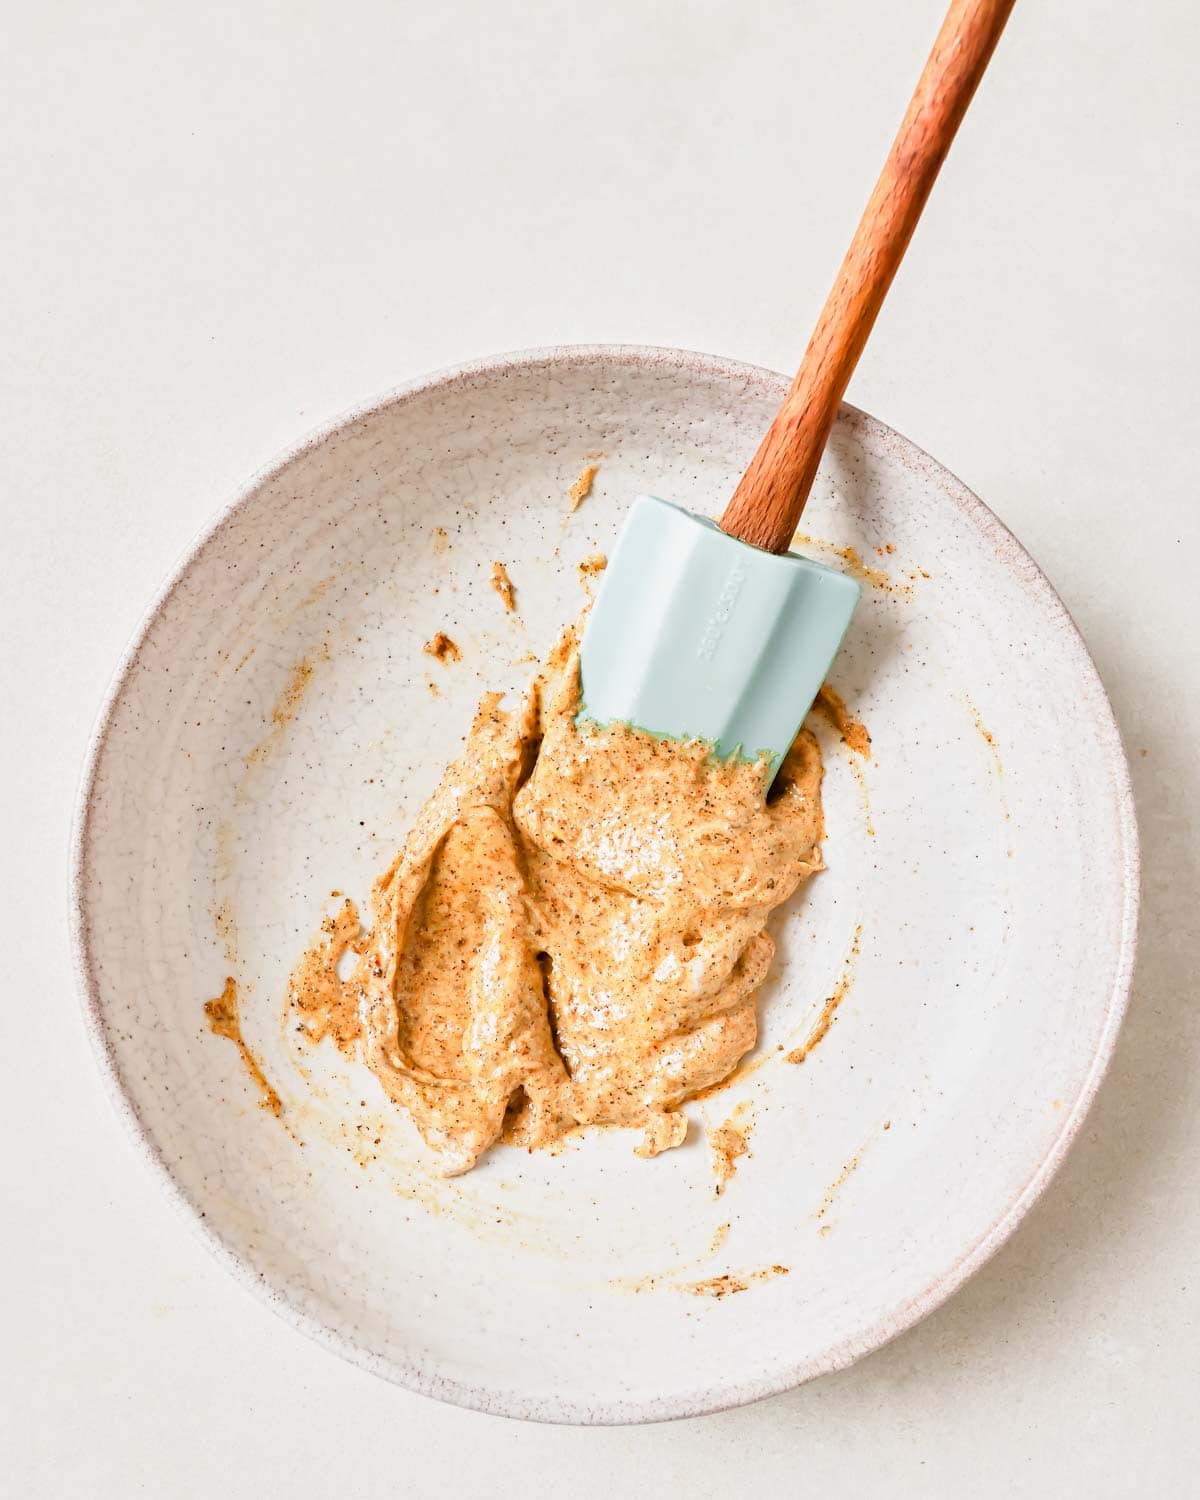 Seasoning spices and mayonnaise mixed together in a bowl with a wooden spoon.